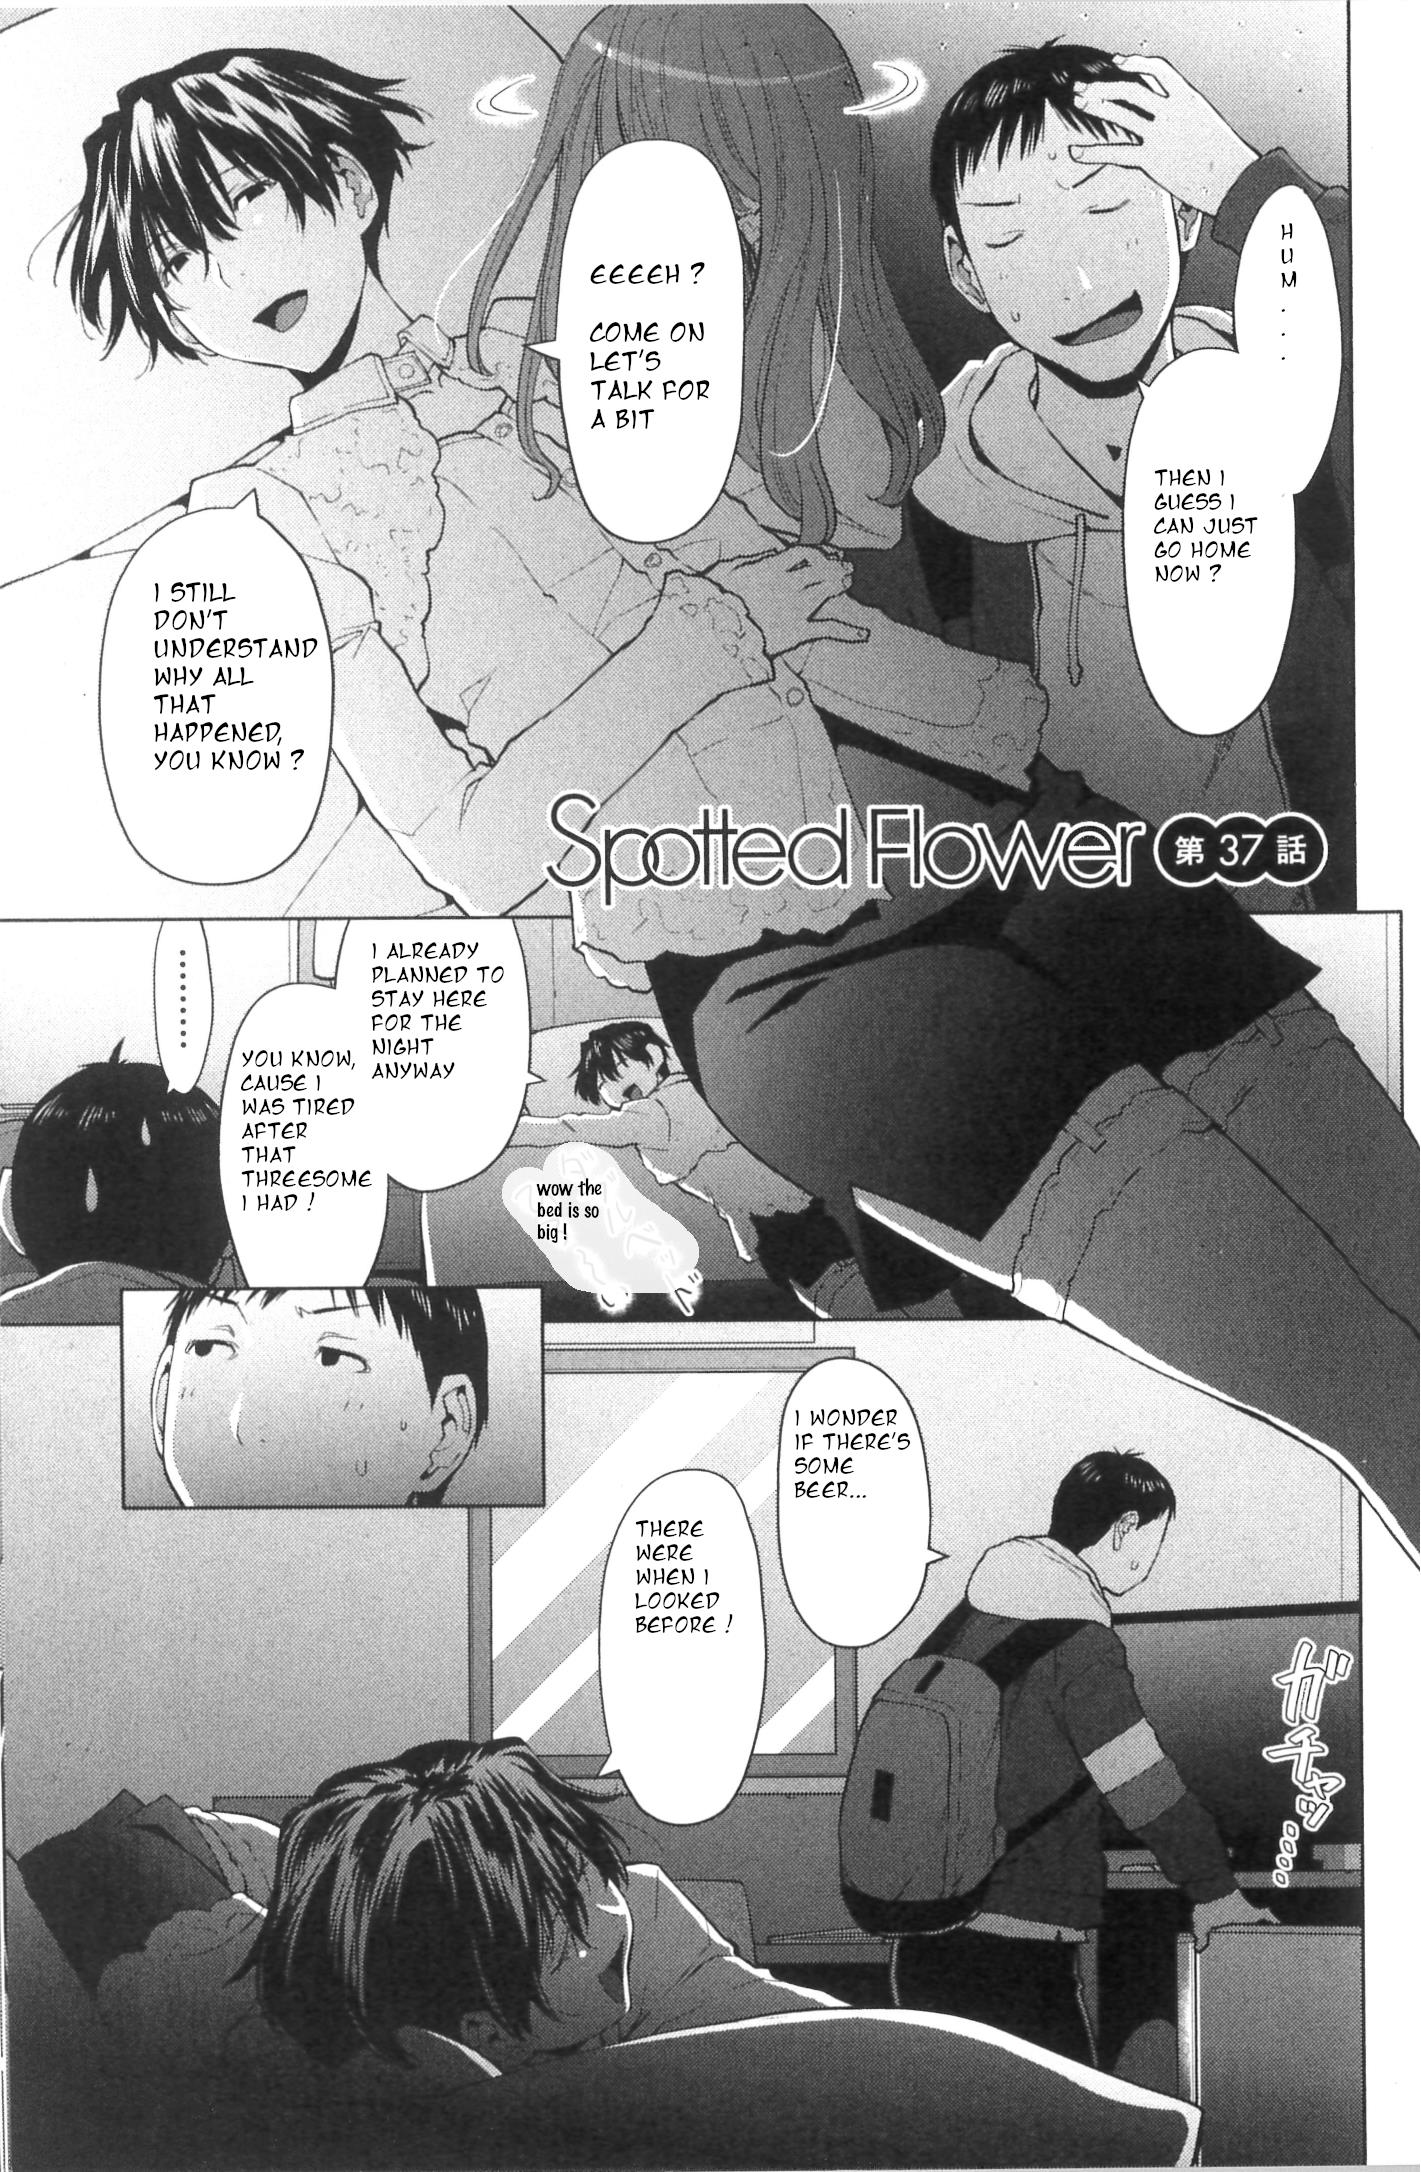 Spotted Flower Chapter 37 #1